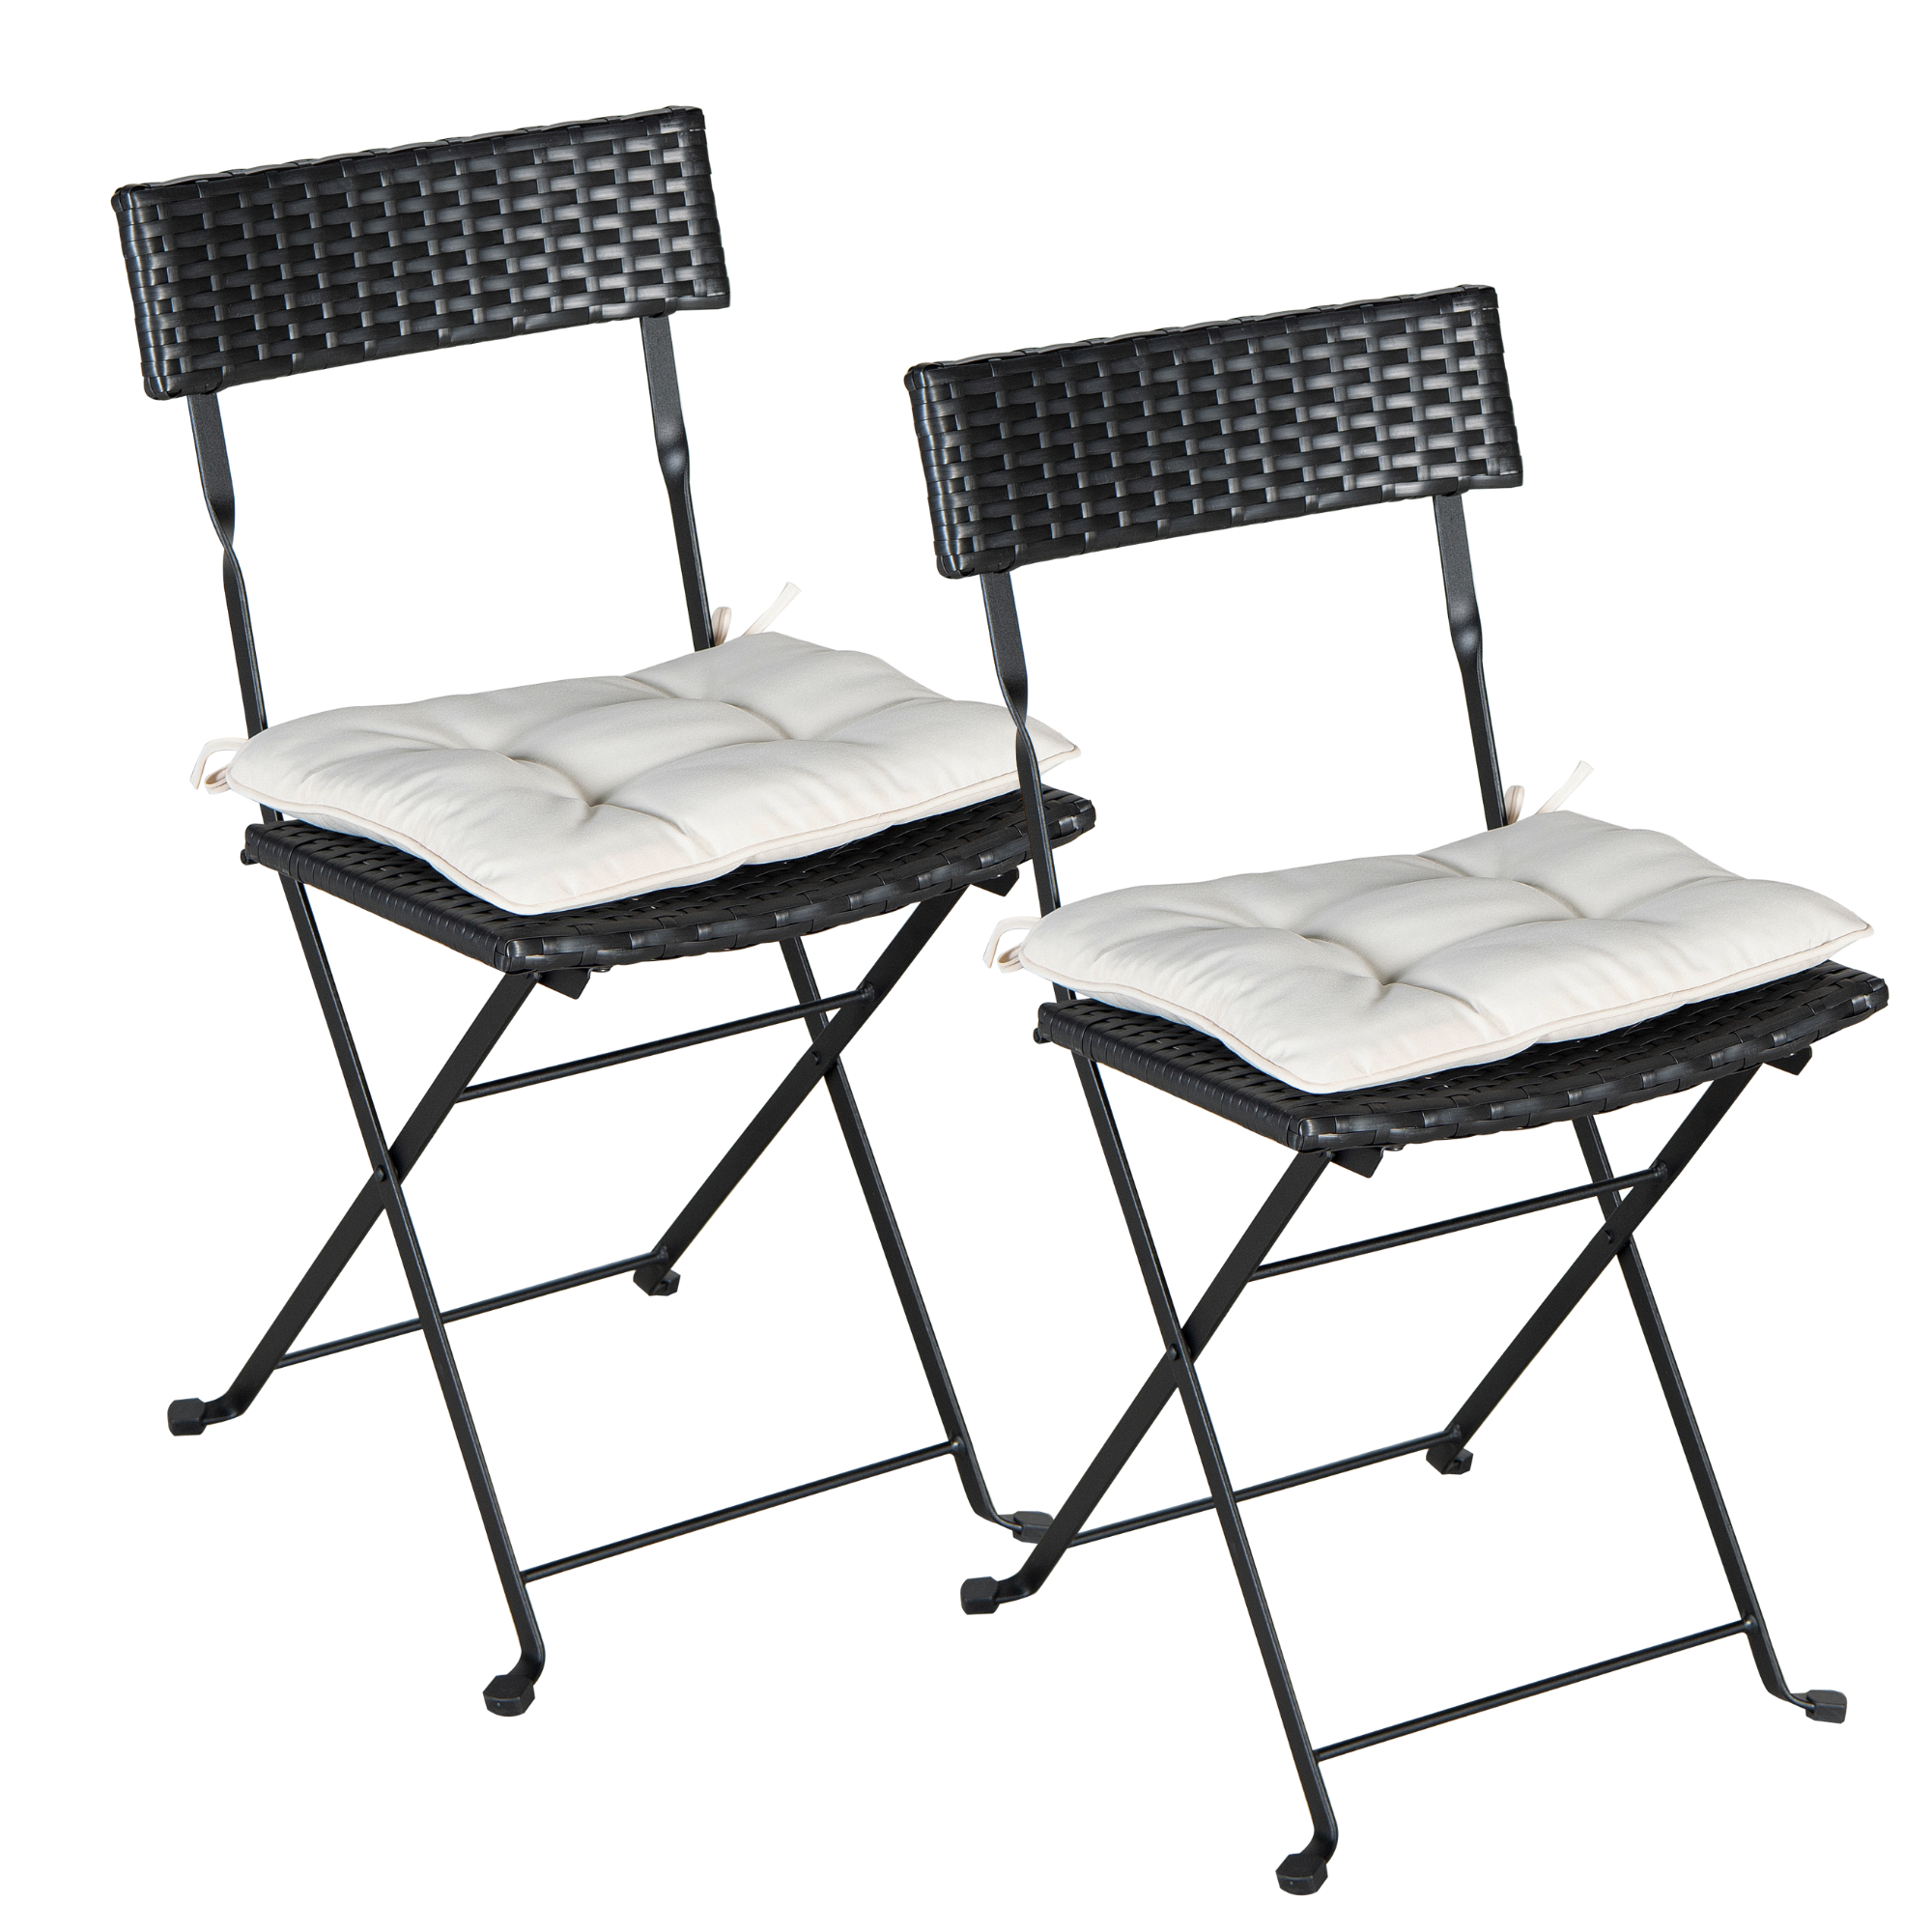 Details about   Set of 2 Patio Folding Chair Rattan Wicker Chair Furniture Portable Dining Chair 